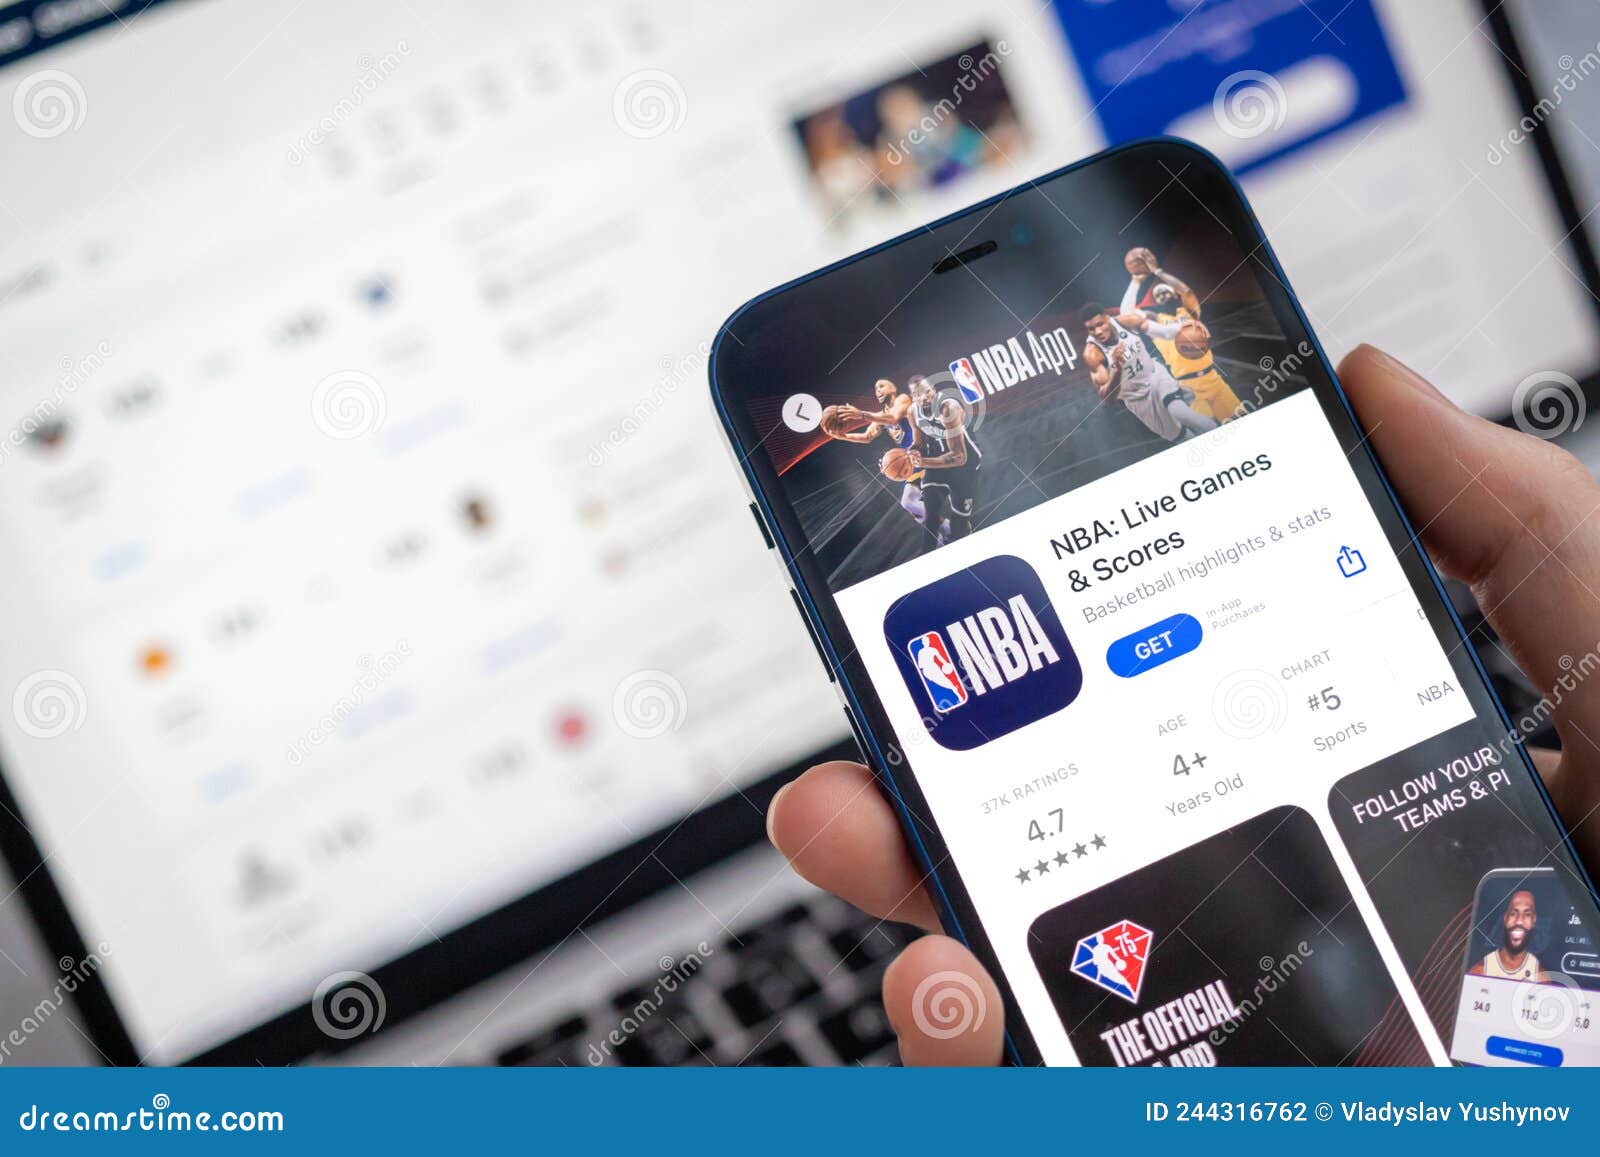 NBA App on the Mobile Phone Screen